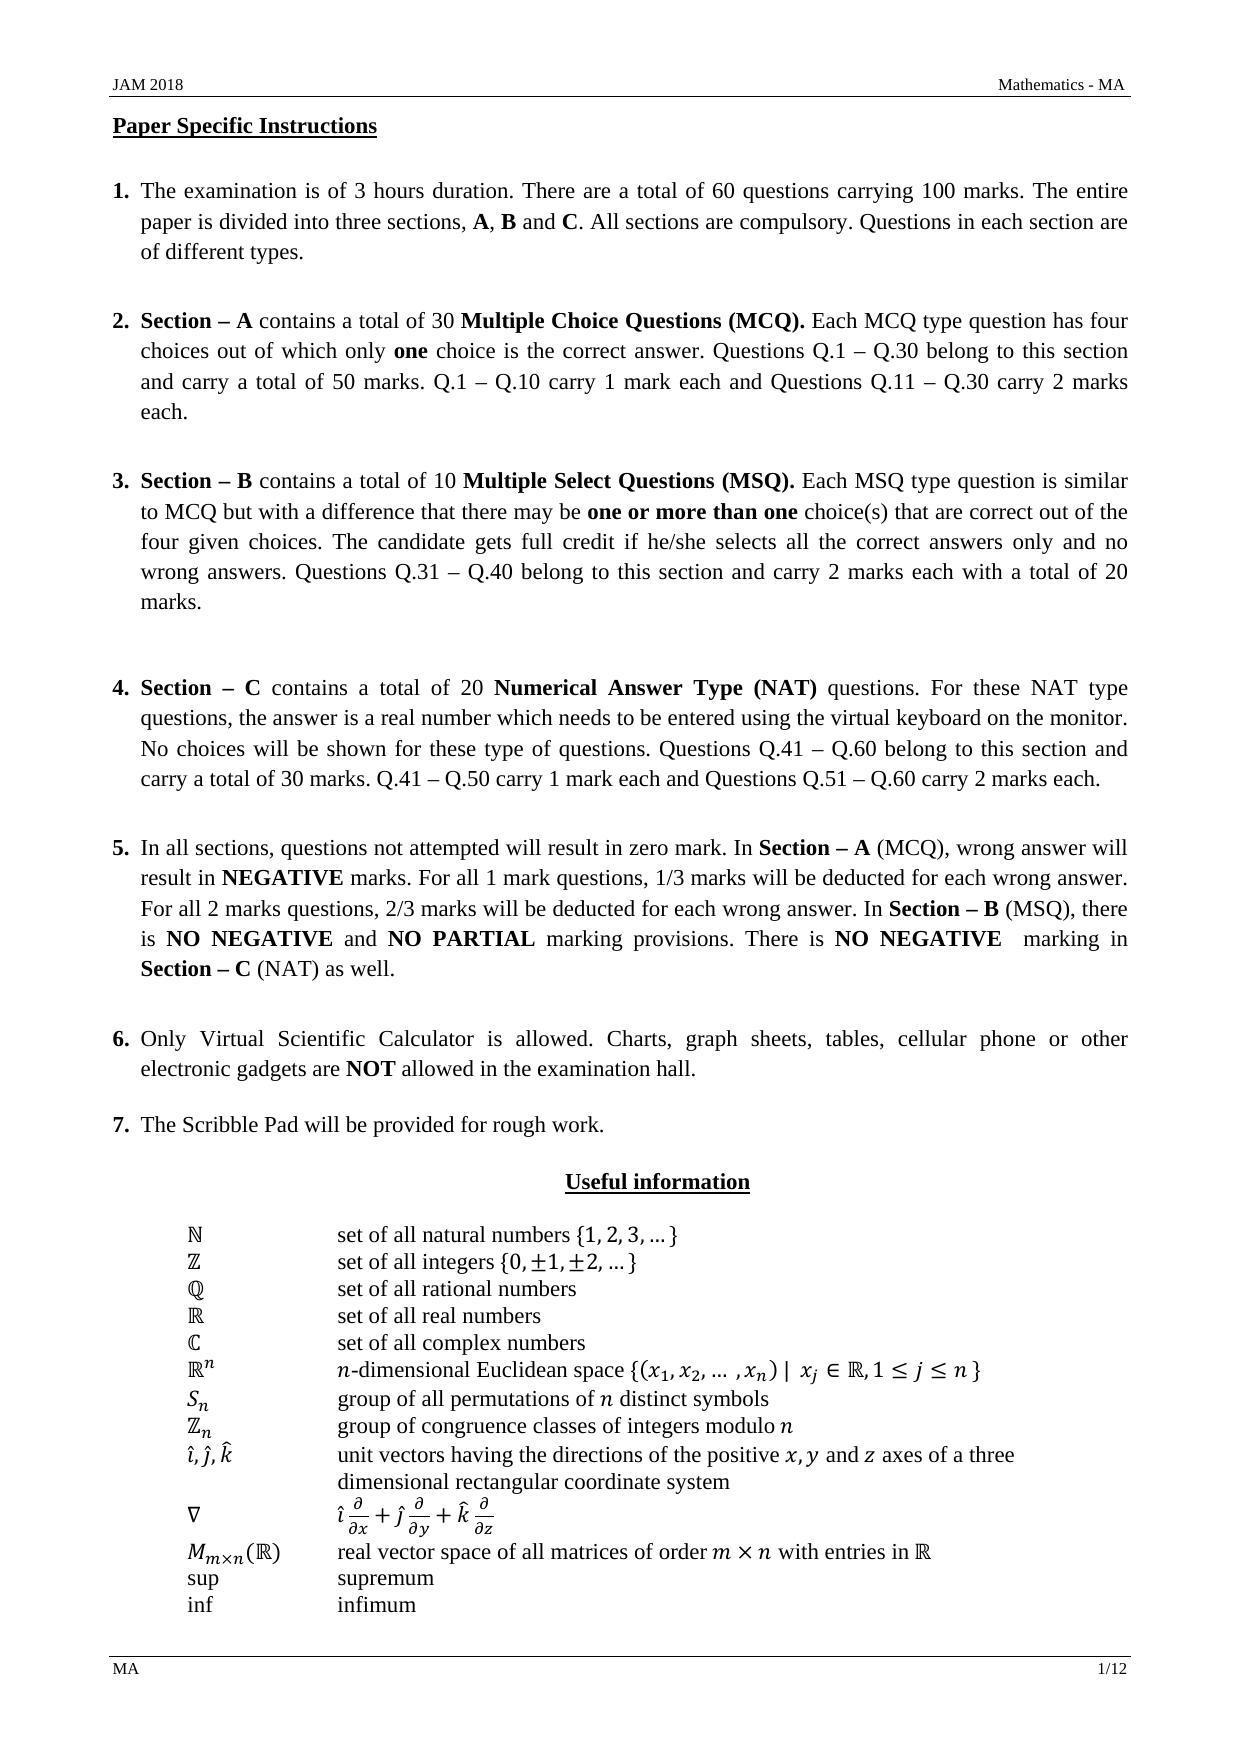 JAM 2018: MA Question Paper - Page 1